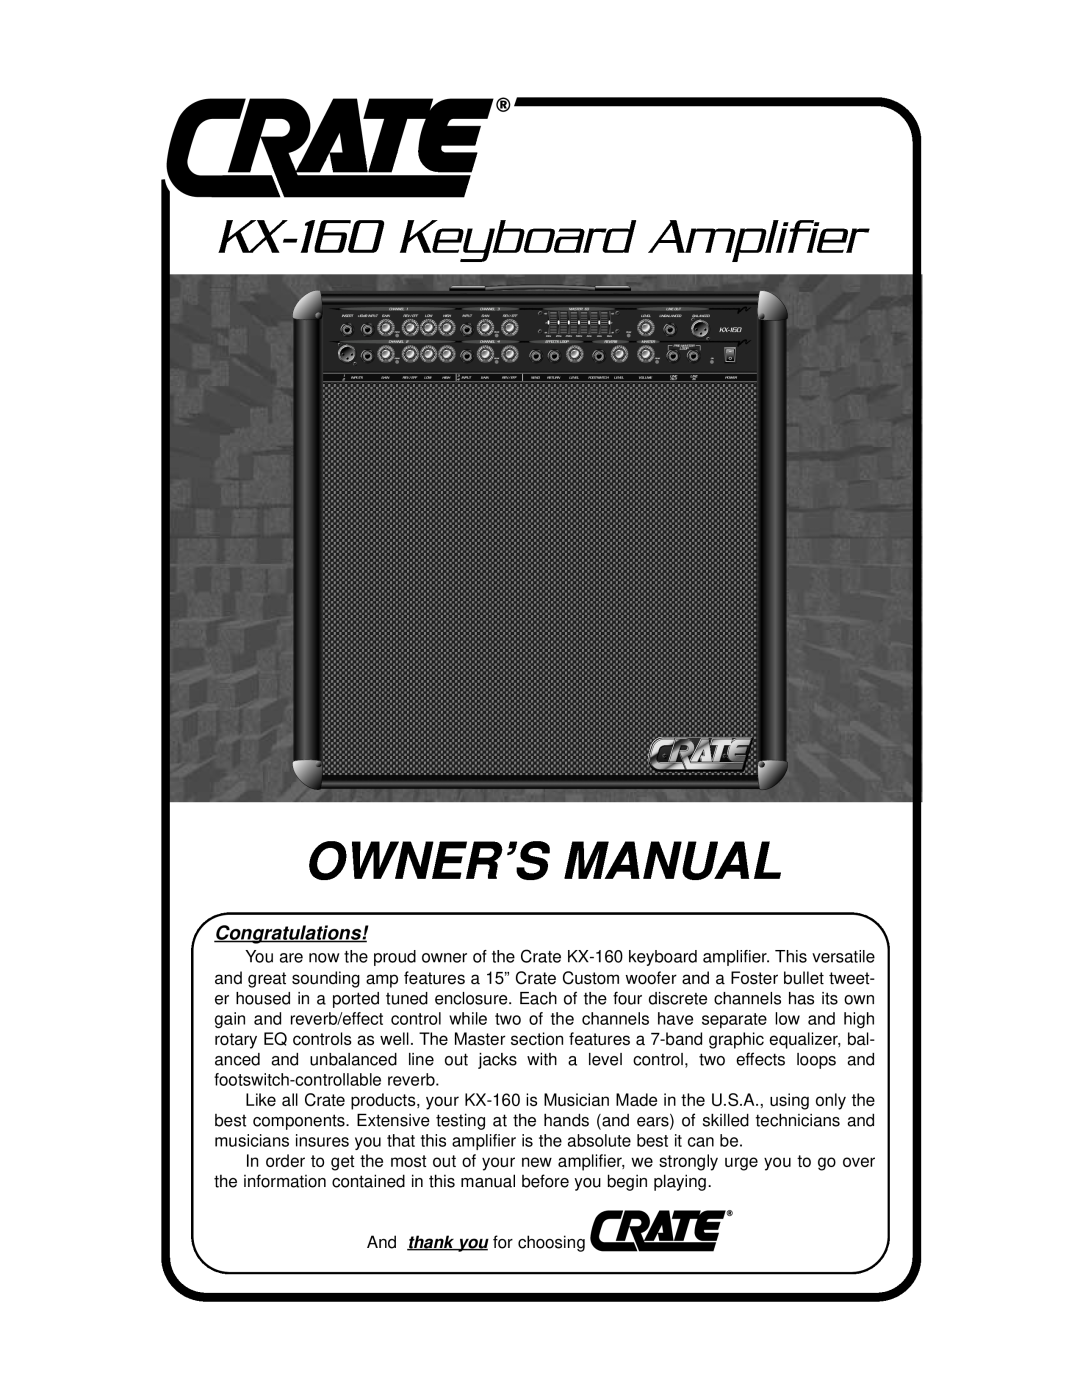 Crate Amplifiers owner manual KX-160 Keyboard Amplifier, Owner’S Manual, Congratulations 